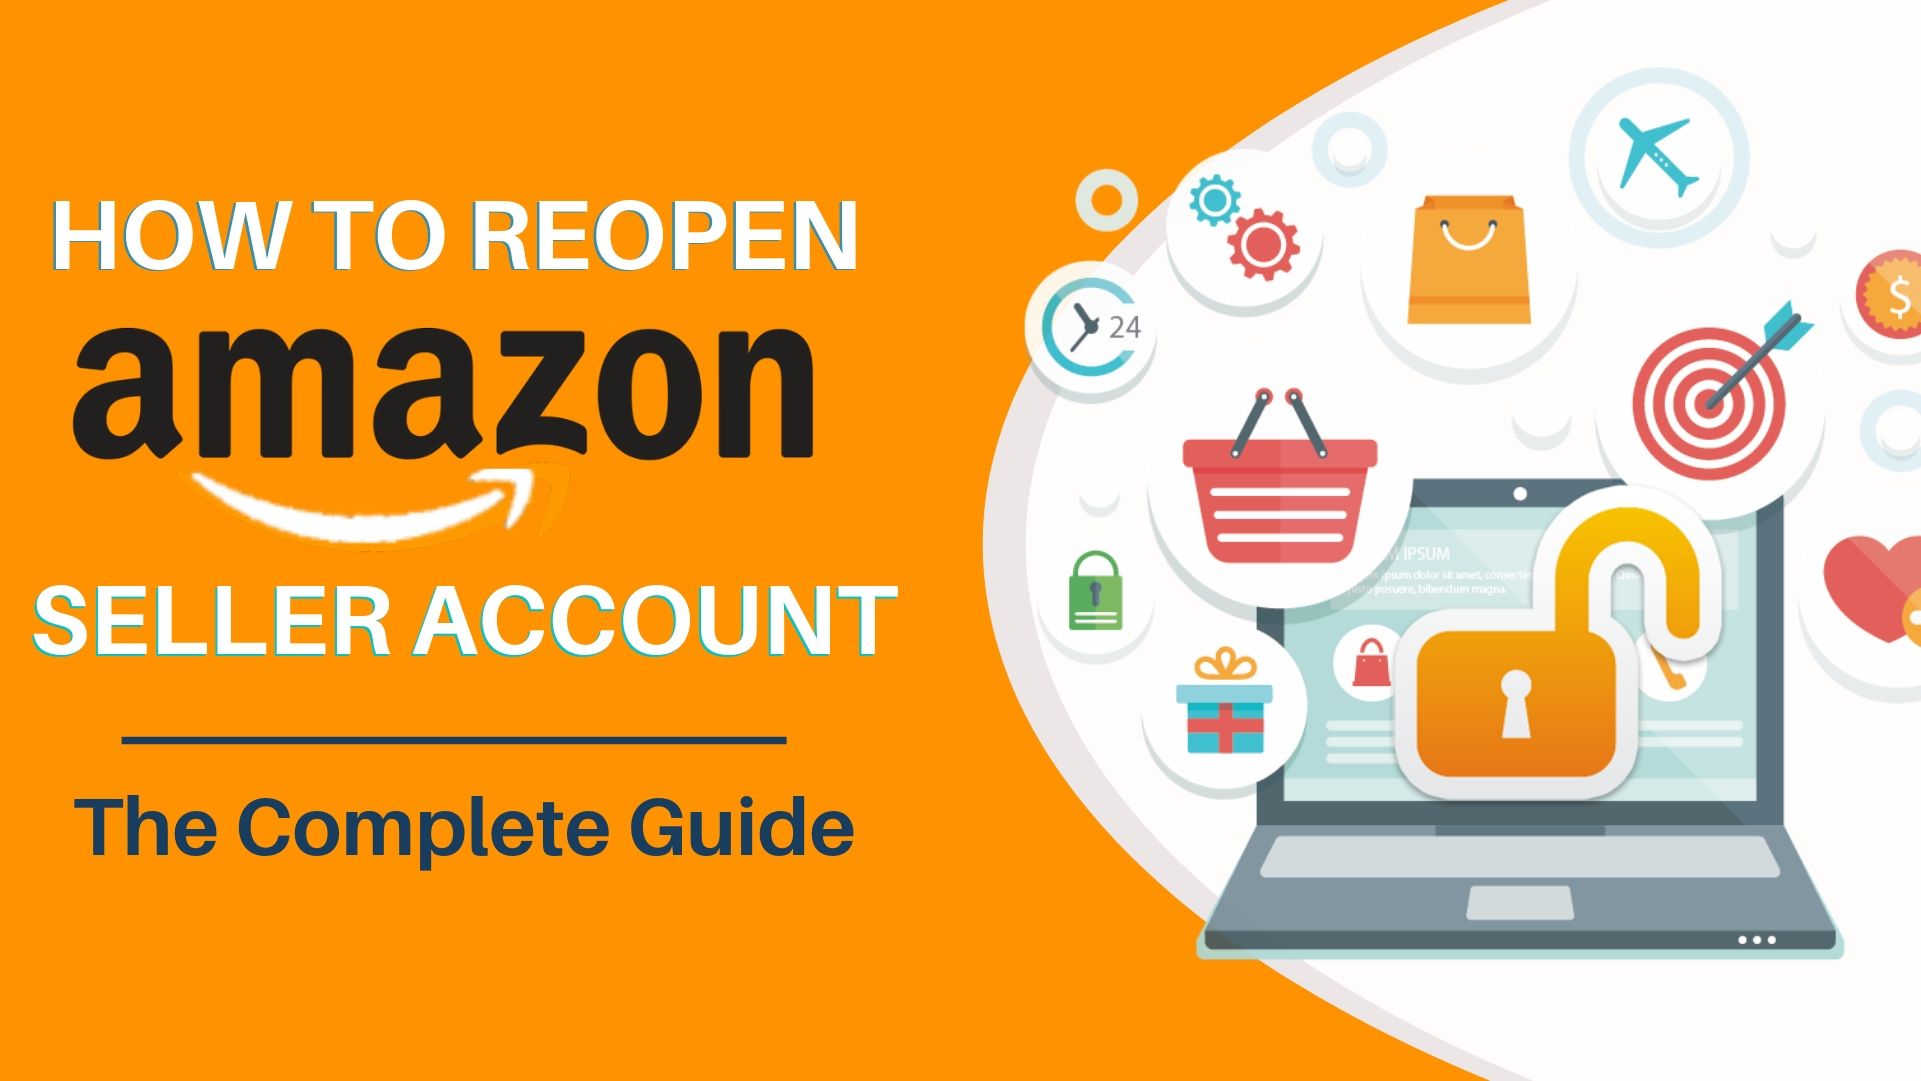 HOW-TO-REOPEN-AMAZON-SELLER-ACCOUNT-–-THE-COMPLETE-GUIDE